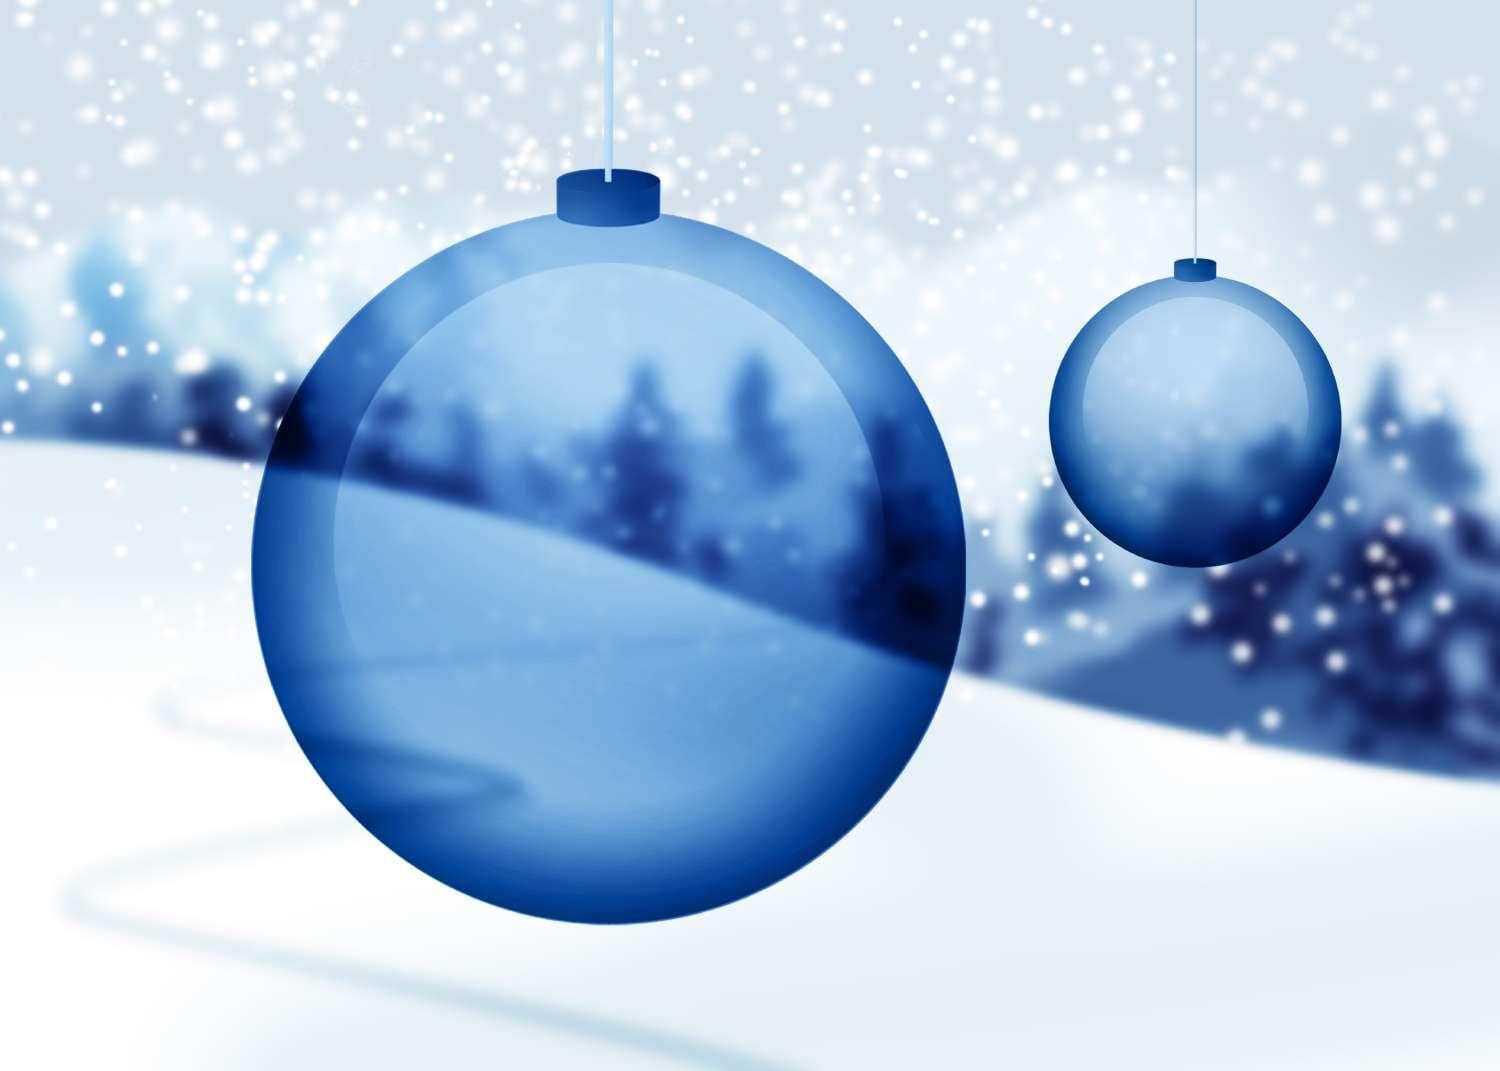 Transparent blue Christmas ornaments with snow